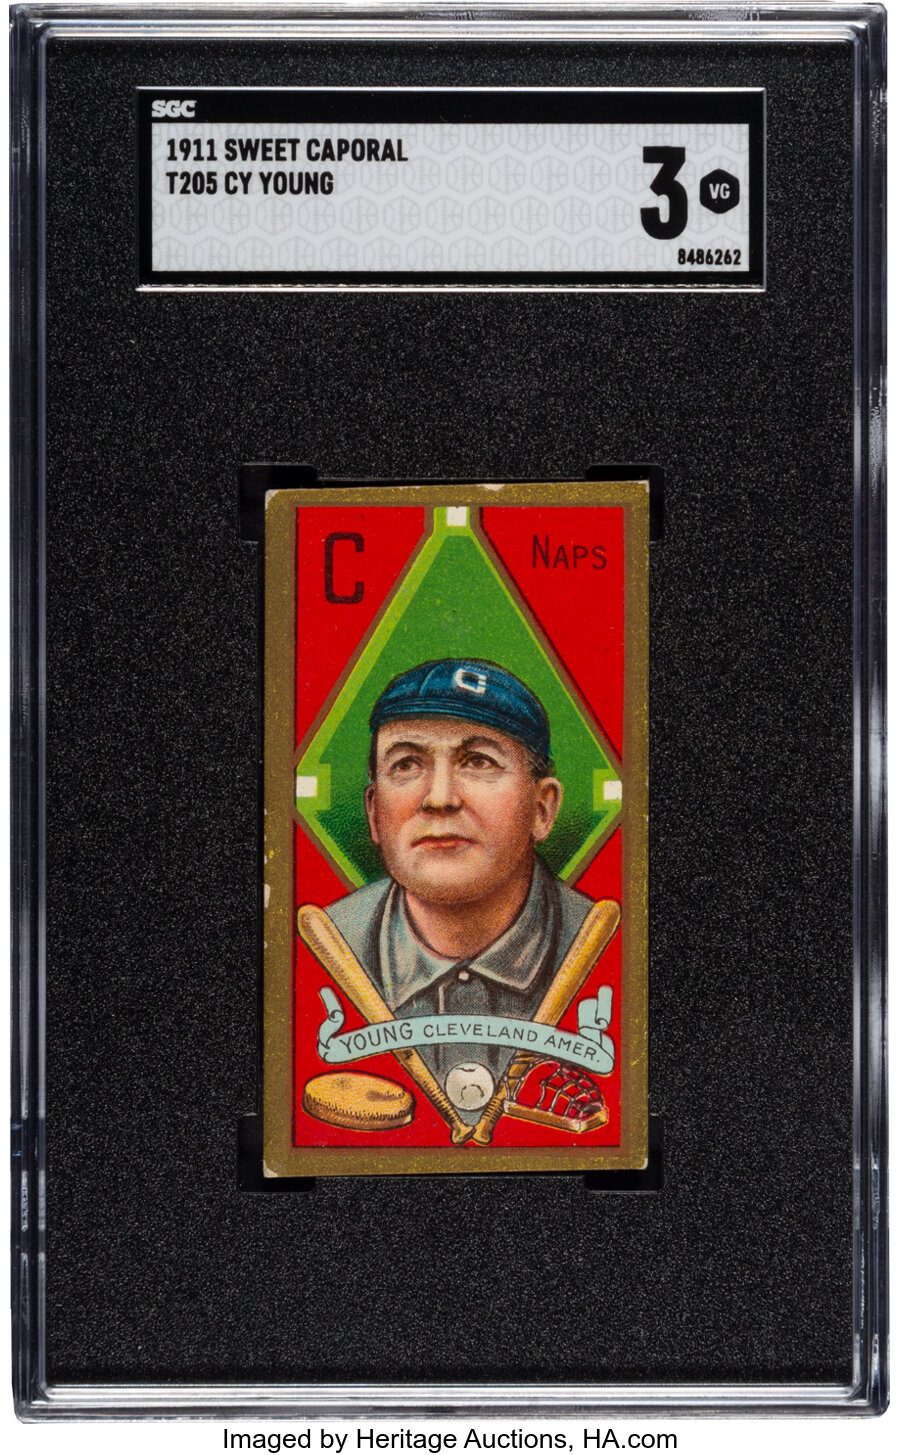 1911 T205 Sweet Caporal Cy Young SGC VG 3